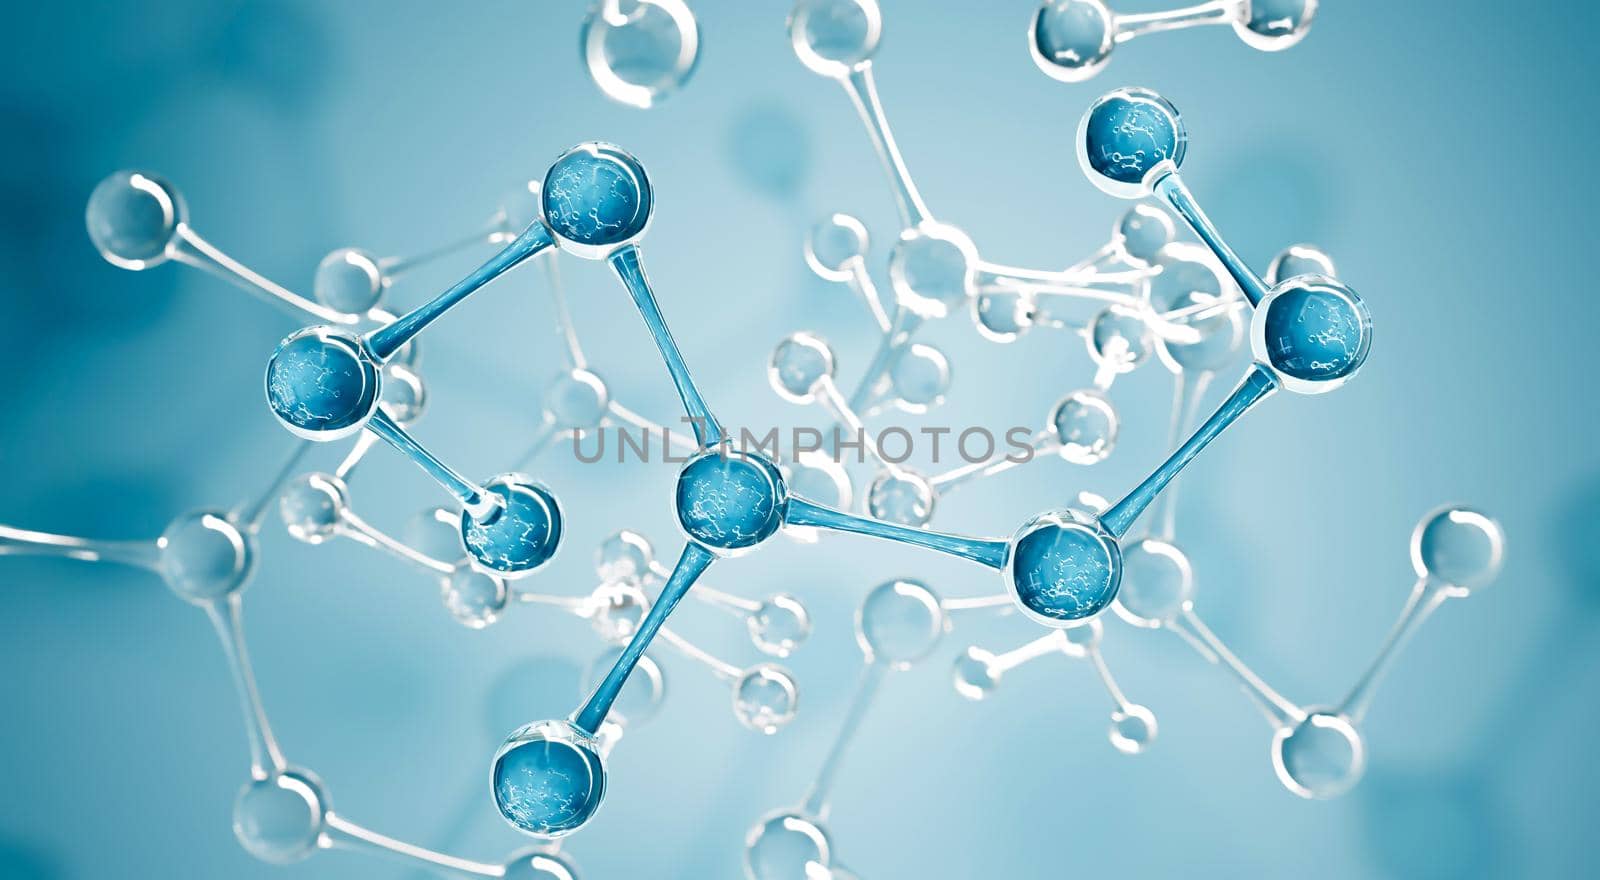 Abstract science background for chemistry banner or flyer. Abstract water or dna molecules design. Atoms formula. Science or medical background. 3d rendering illustration